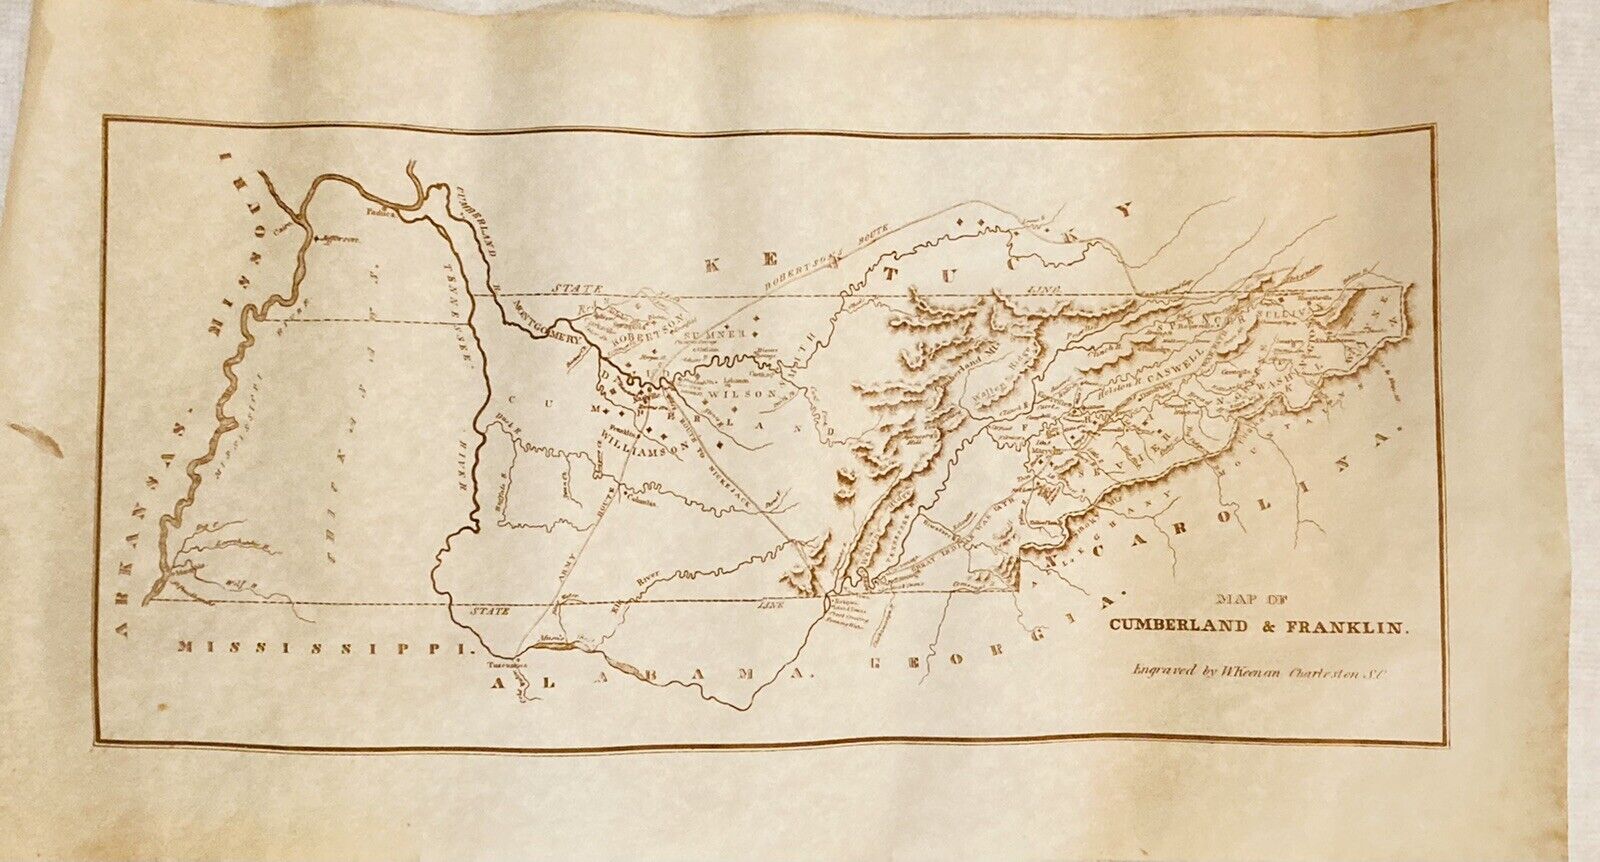 Vintage Map Of Cumberland & Franklin As Referred To In Ramsey’s Annals TN 1853